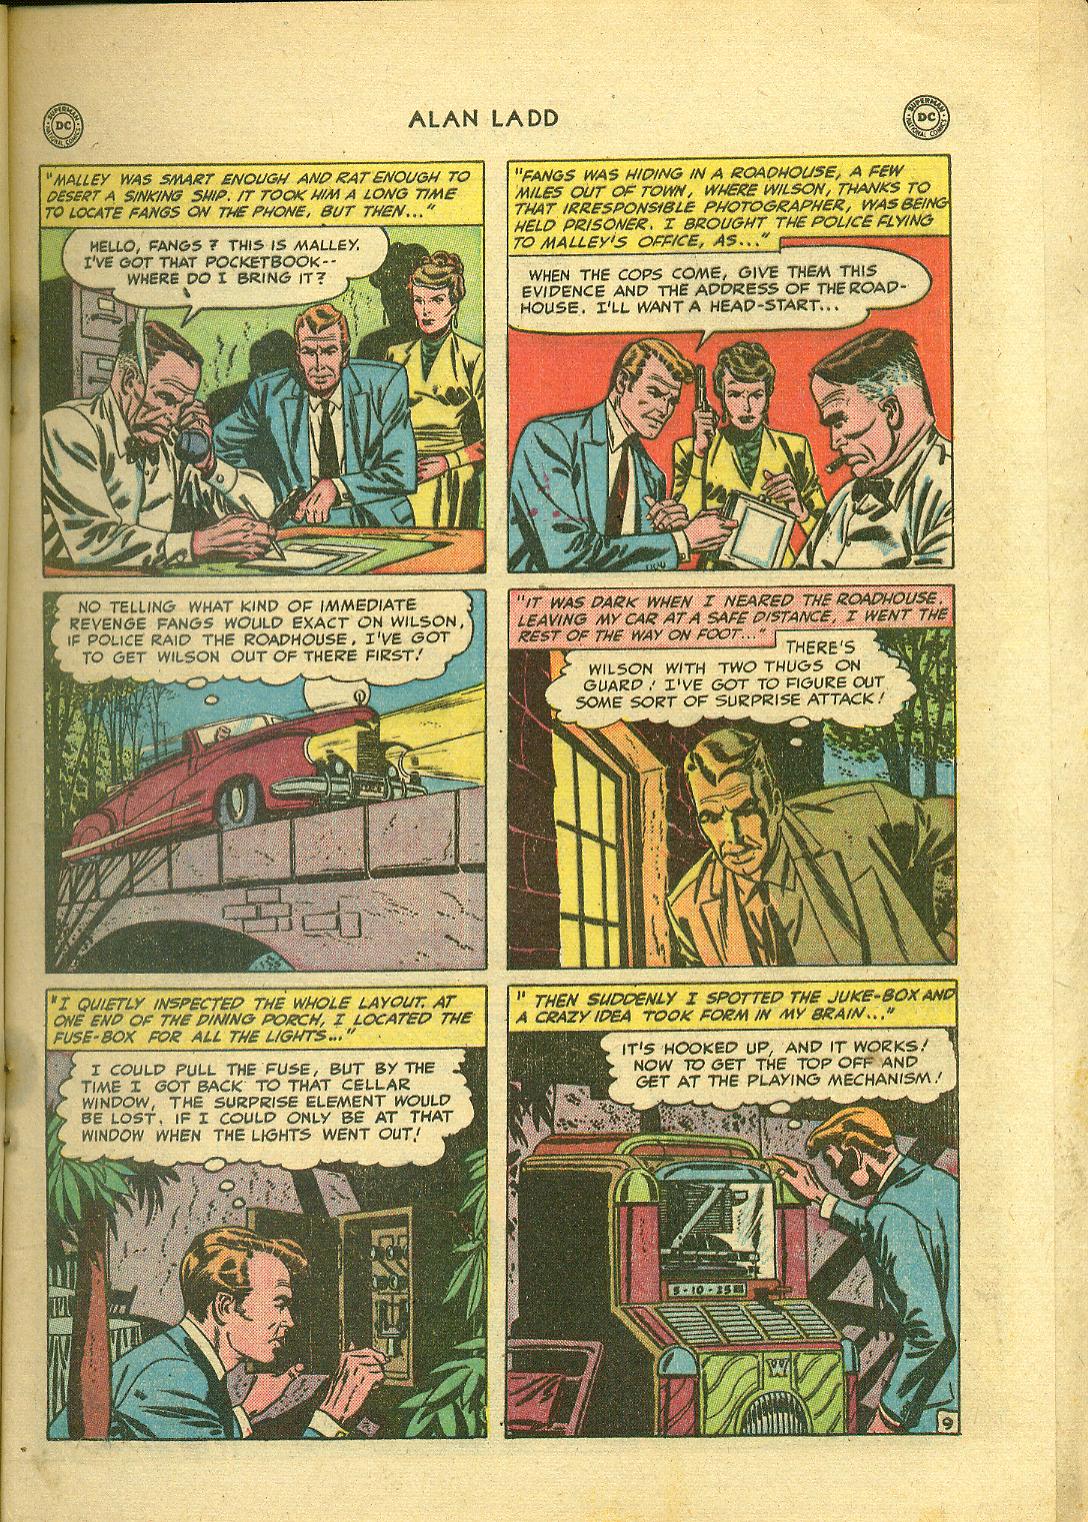 Read online Adventures of Alan Ladd comic -  Issue #2 - 11